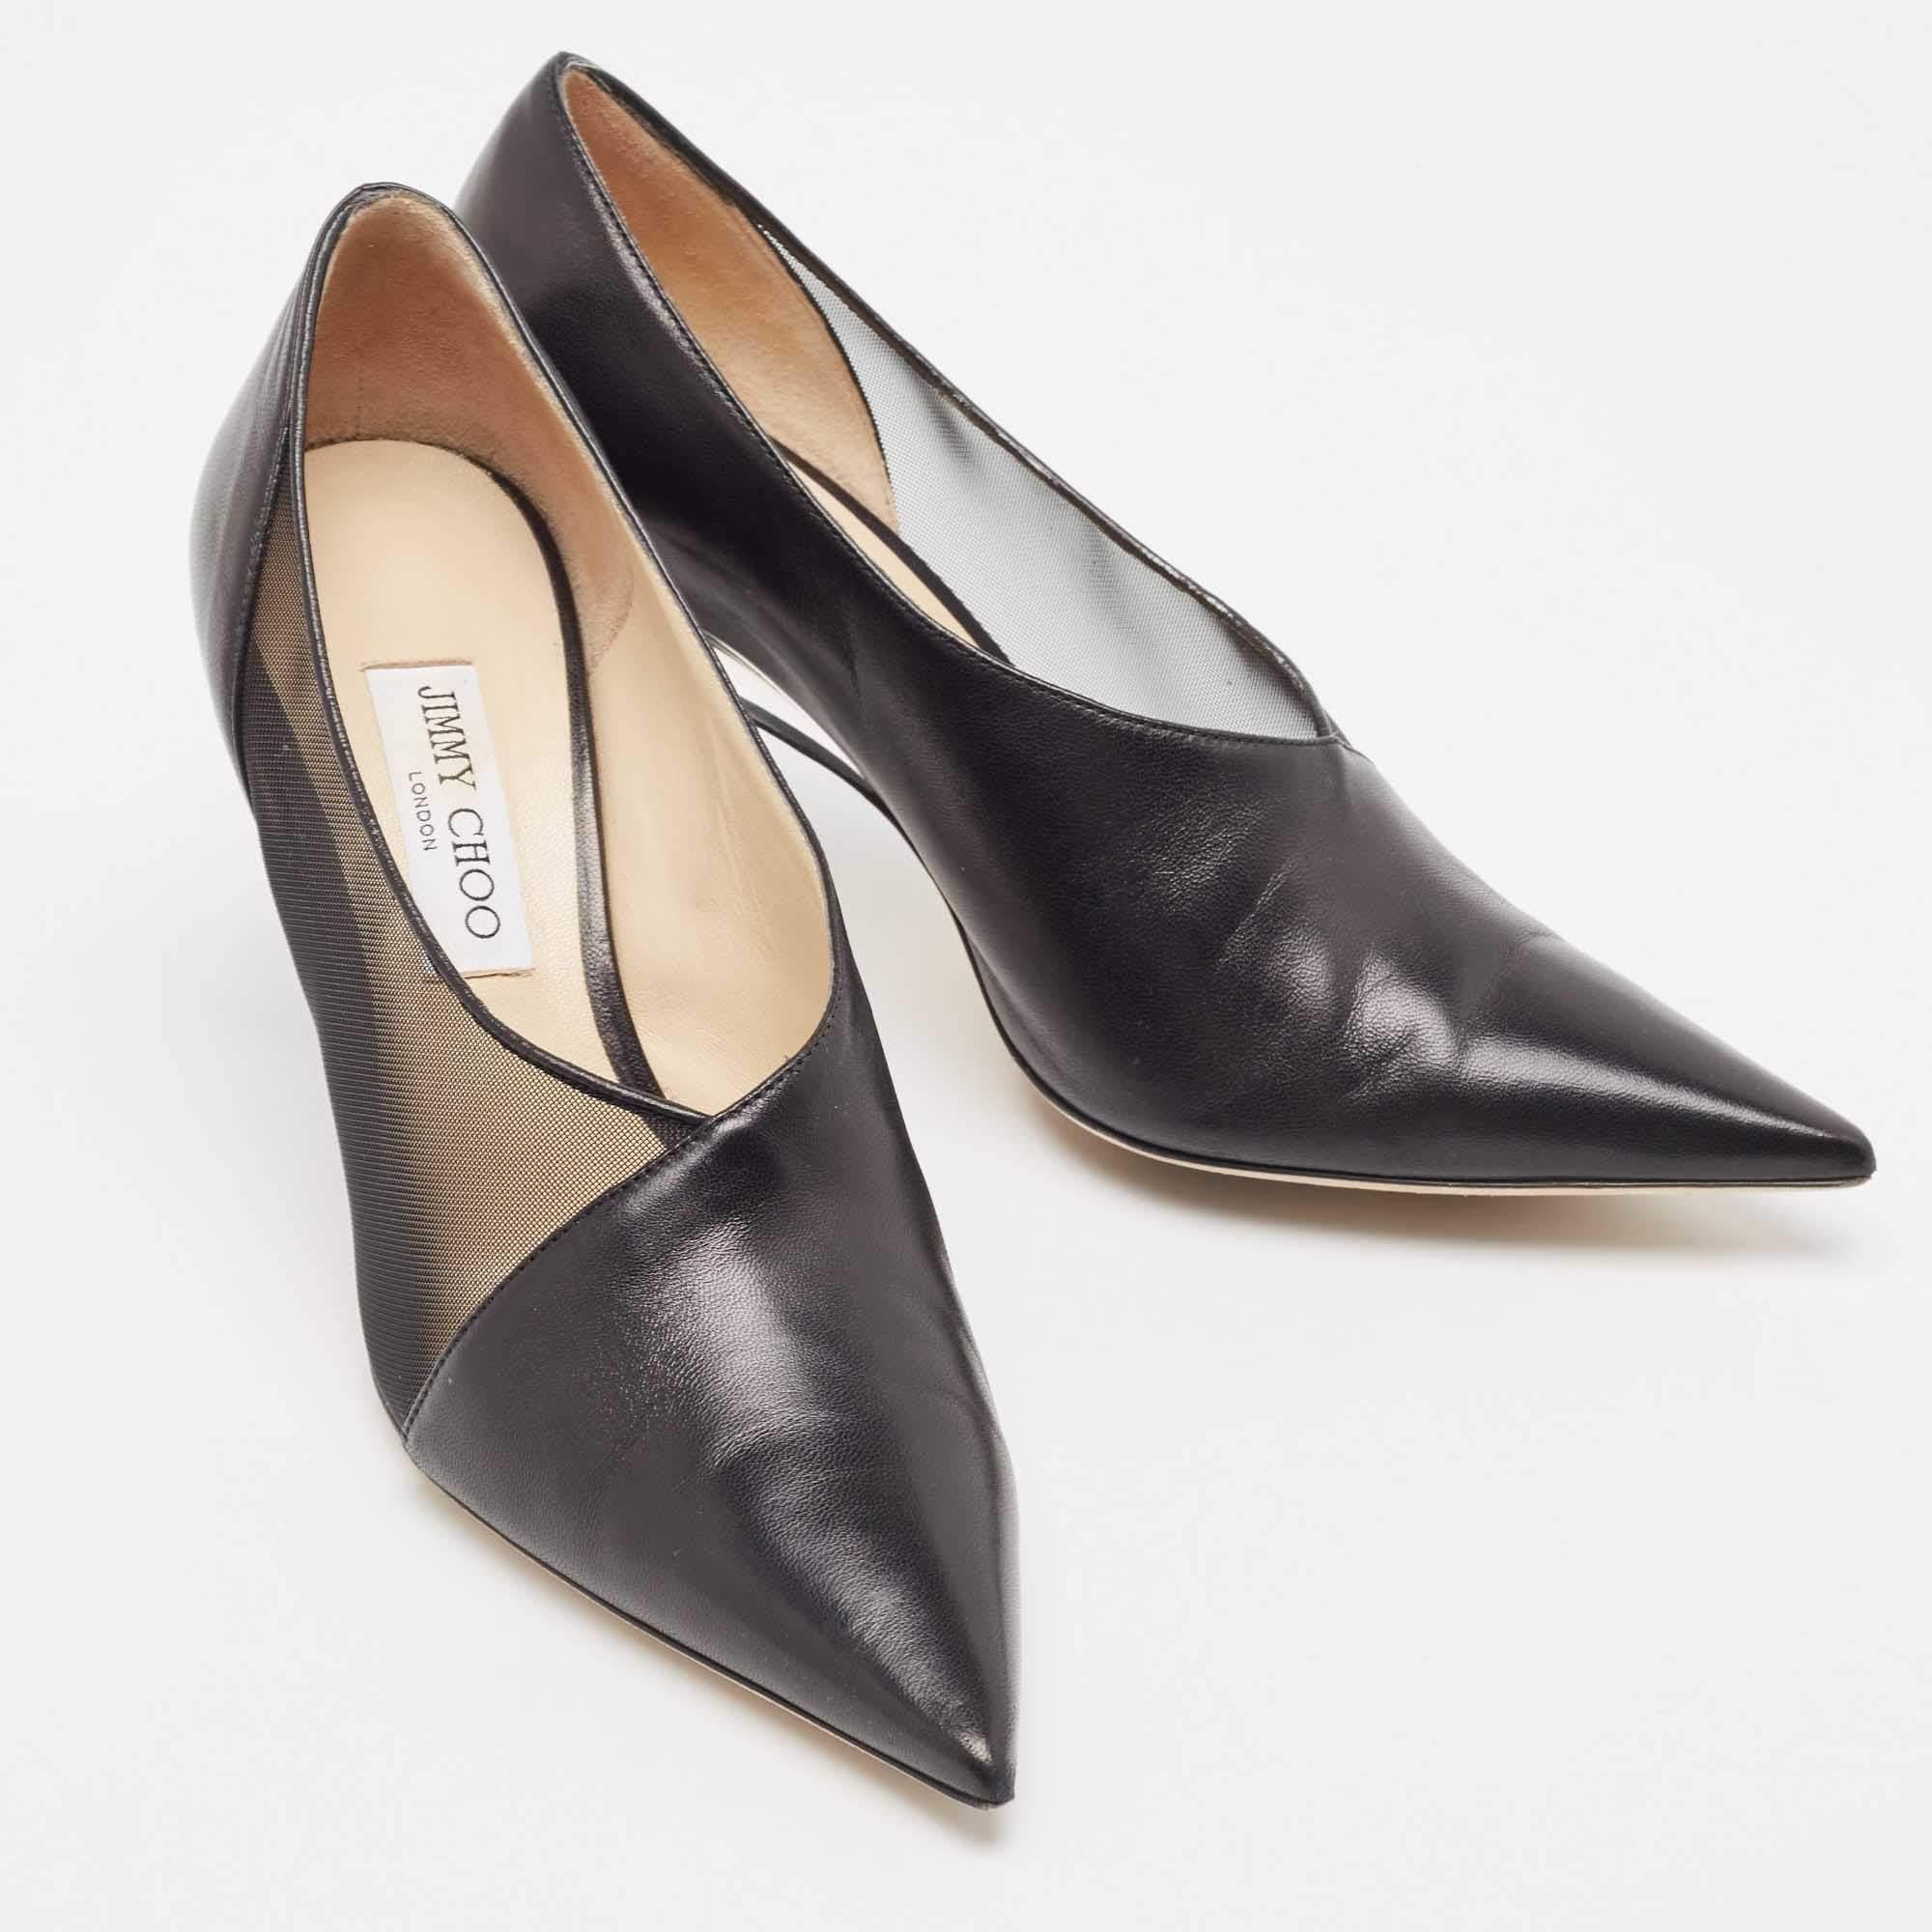 Jimmy Choo Black Leather Pointed Toe Pumps Size 41 In Good Condition For Sale In Dubai, Al Qouz 2